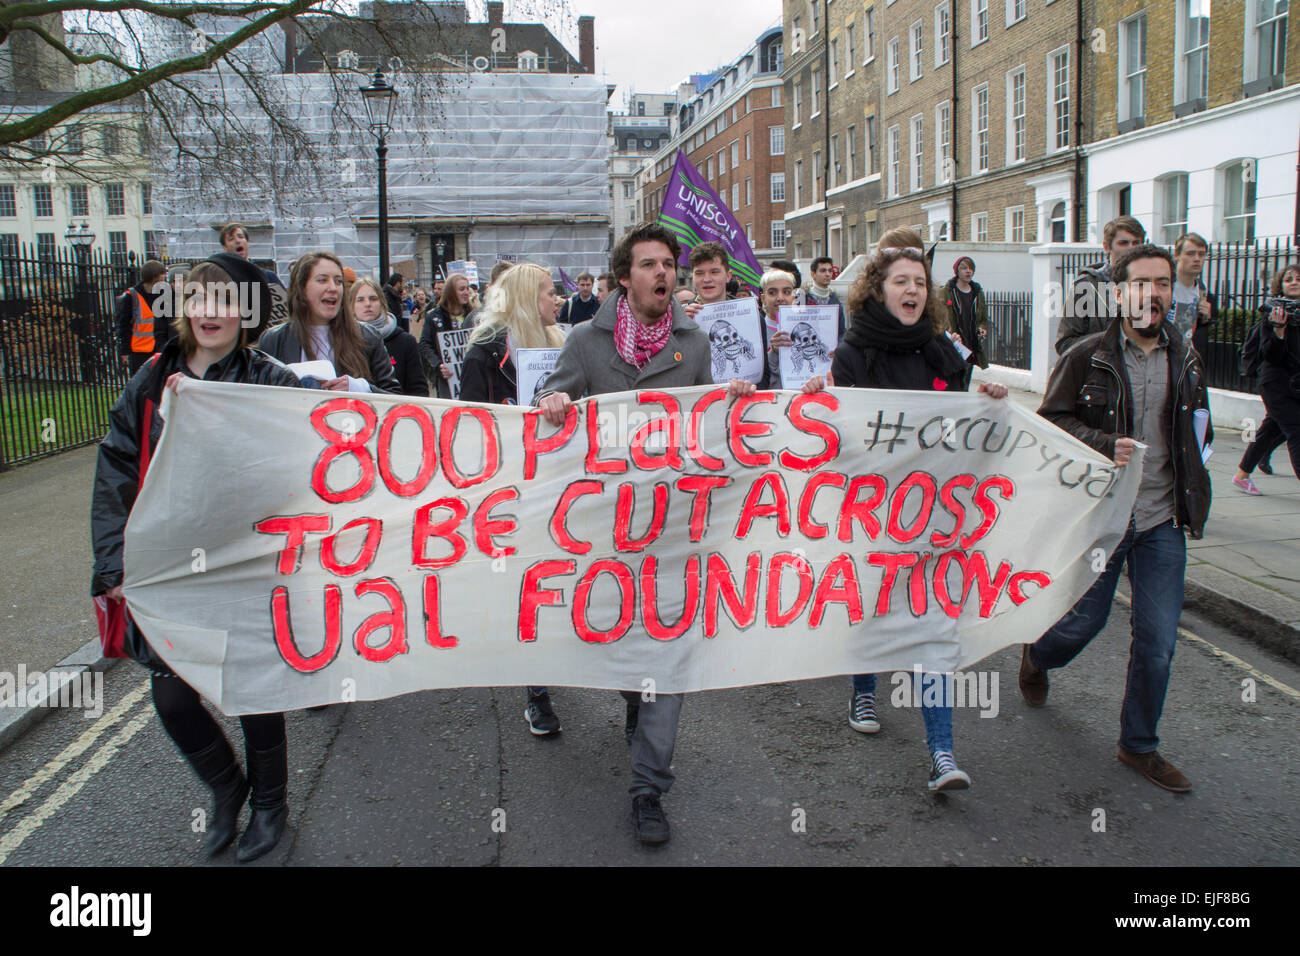 London, UK.  25th March, 2015. Students, education workers and supporters marched from London School of Economics (LSE) to the London College of Communication (LCC) in Elephant and Castle, under the banner of ‘March to stop the cuts at UAL: free education for all’ The demonstration is aimed primarily at protesting a series of devastating cuts to Foundation courses at UAL, but is also themed around a broader fight for free and democratic education. The march will demand that the cuts are cancelled, Credit:  Paul Mendoza/Alamy Live News Stock Photo